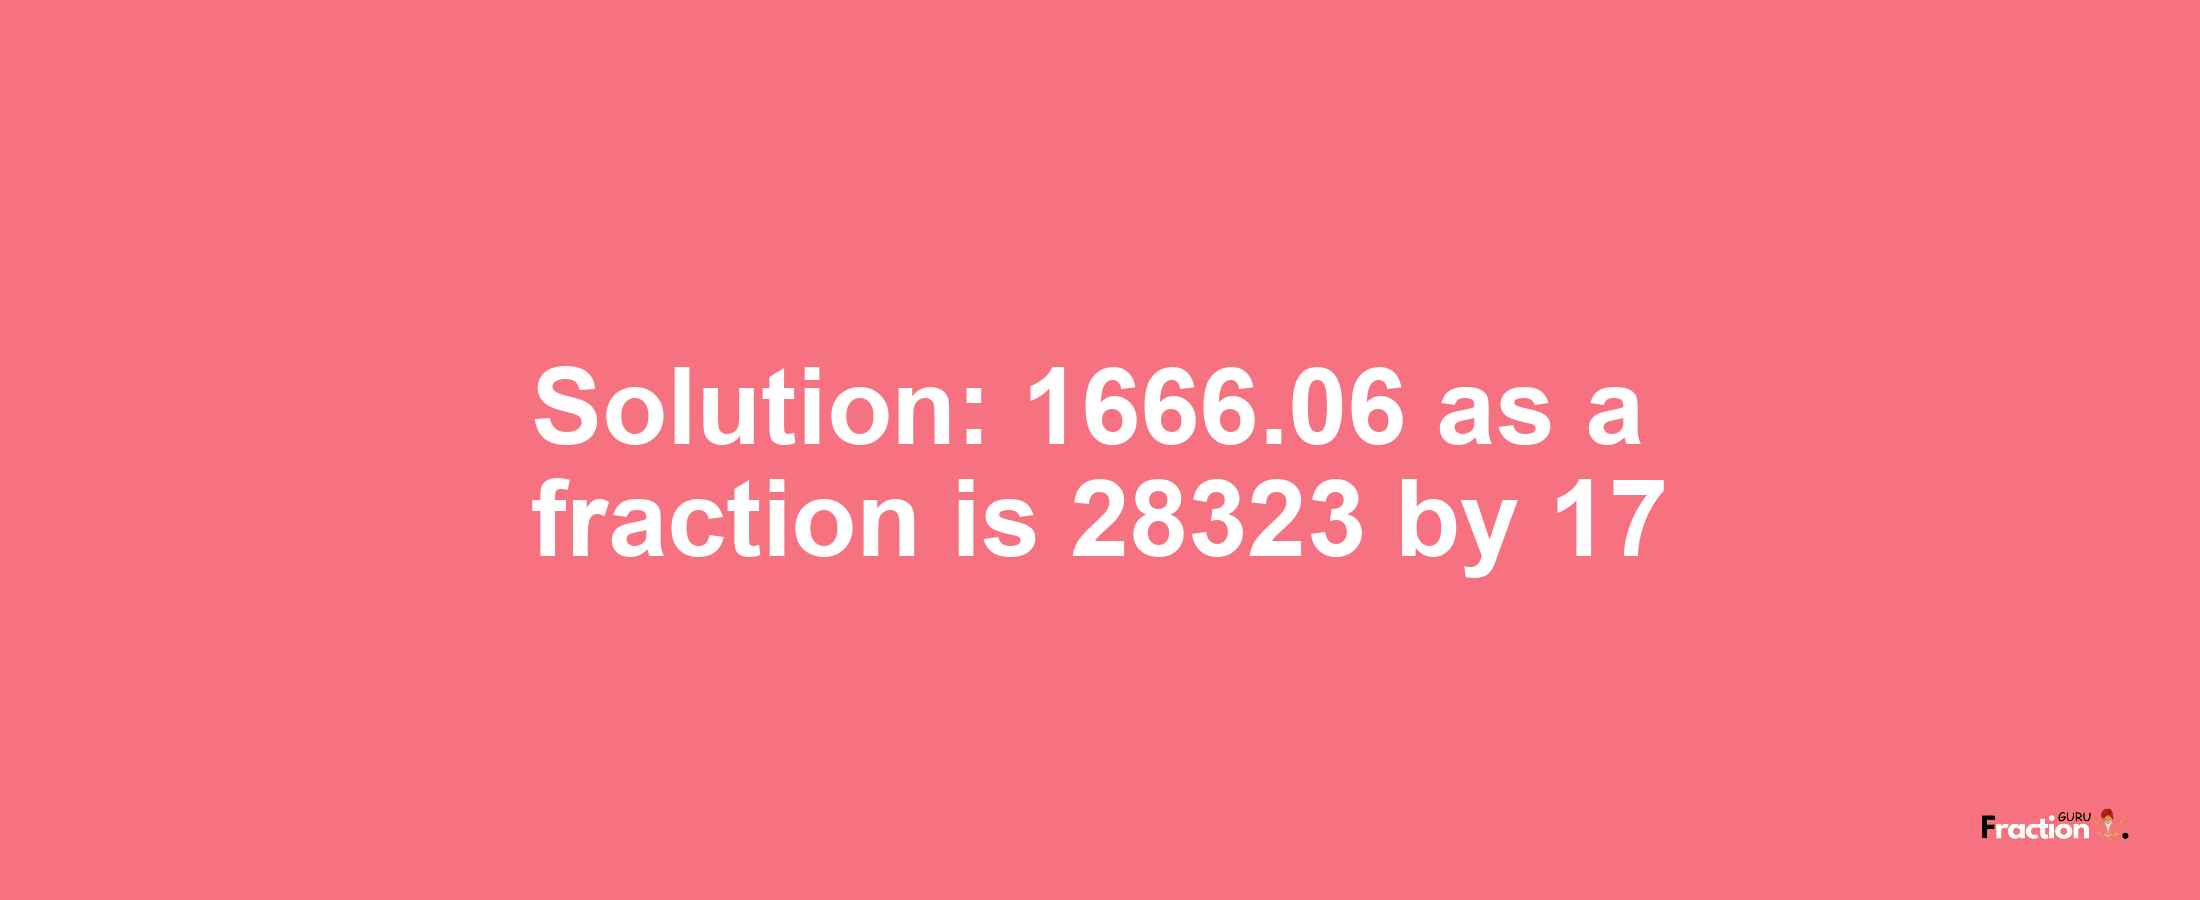 Solution:1666.06 as a fraction is 28323/17